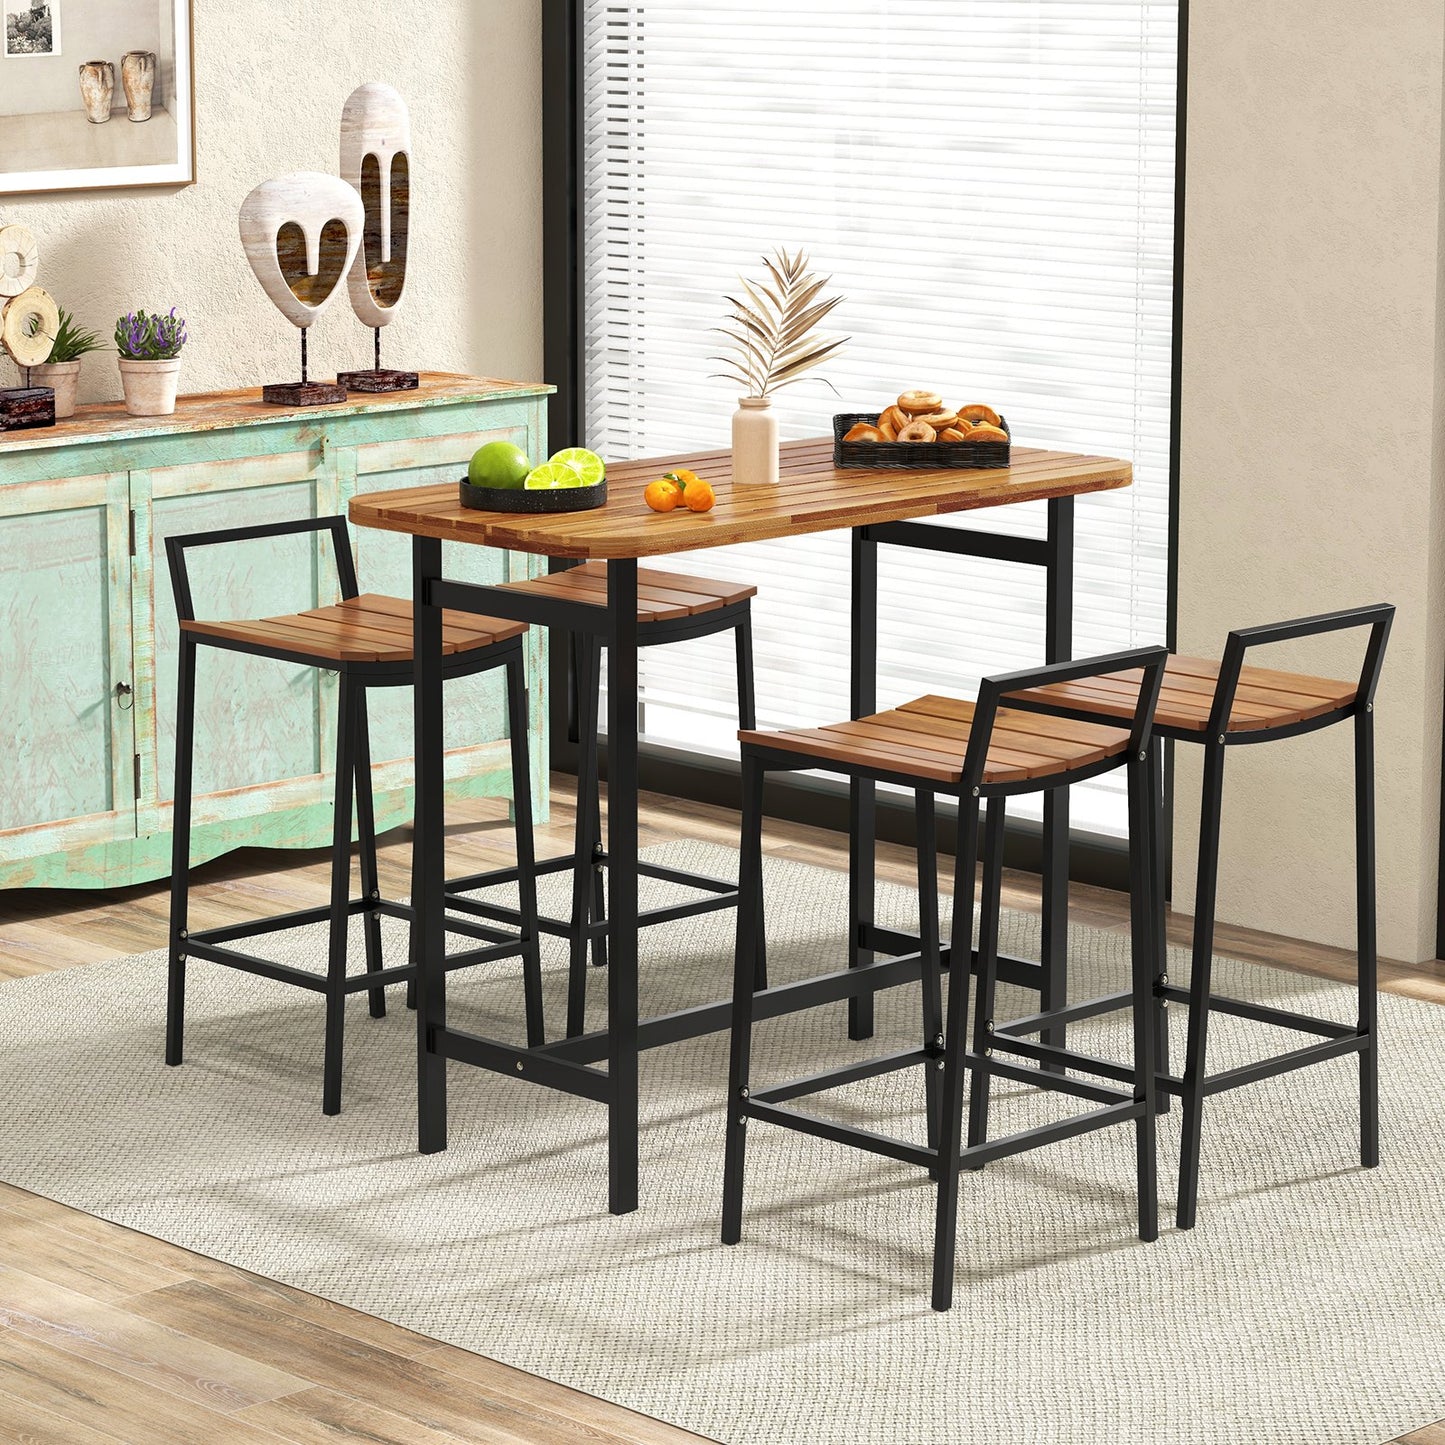 5 Piece Acacia Wood Bar Table Set Bar Height Table and Chairs with Metal Frame and Footrest